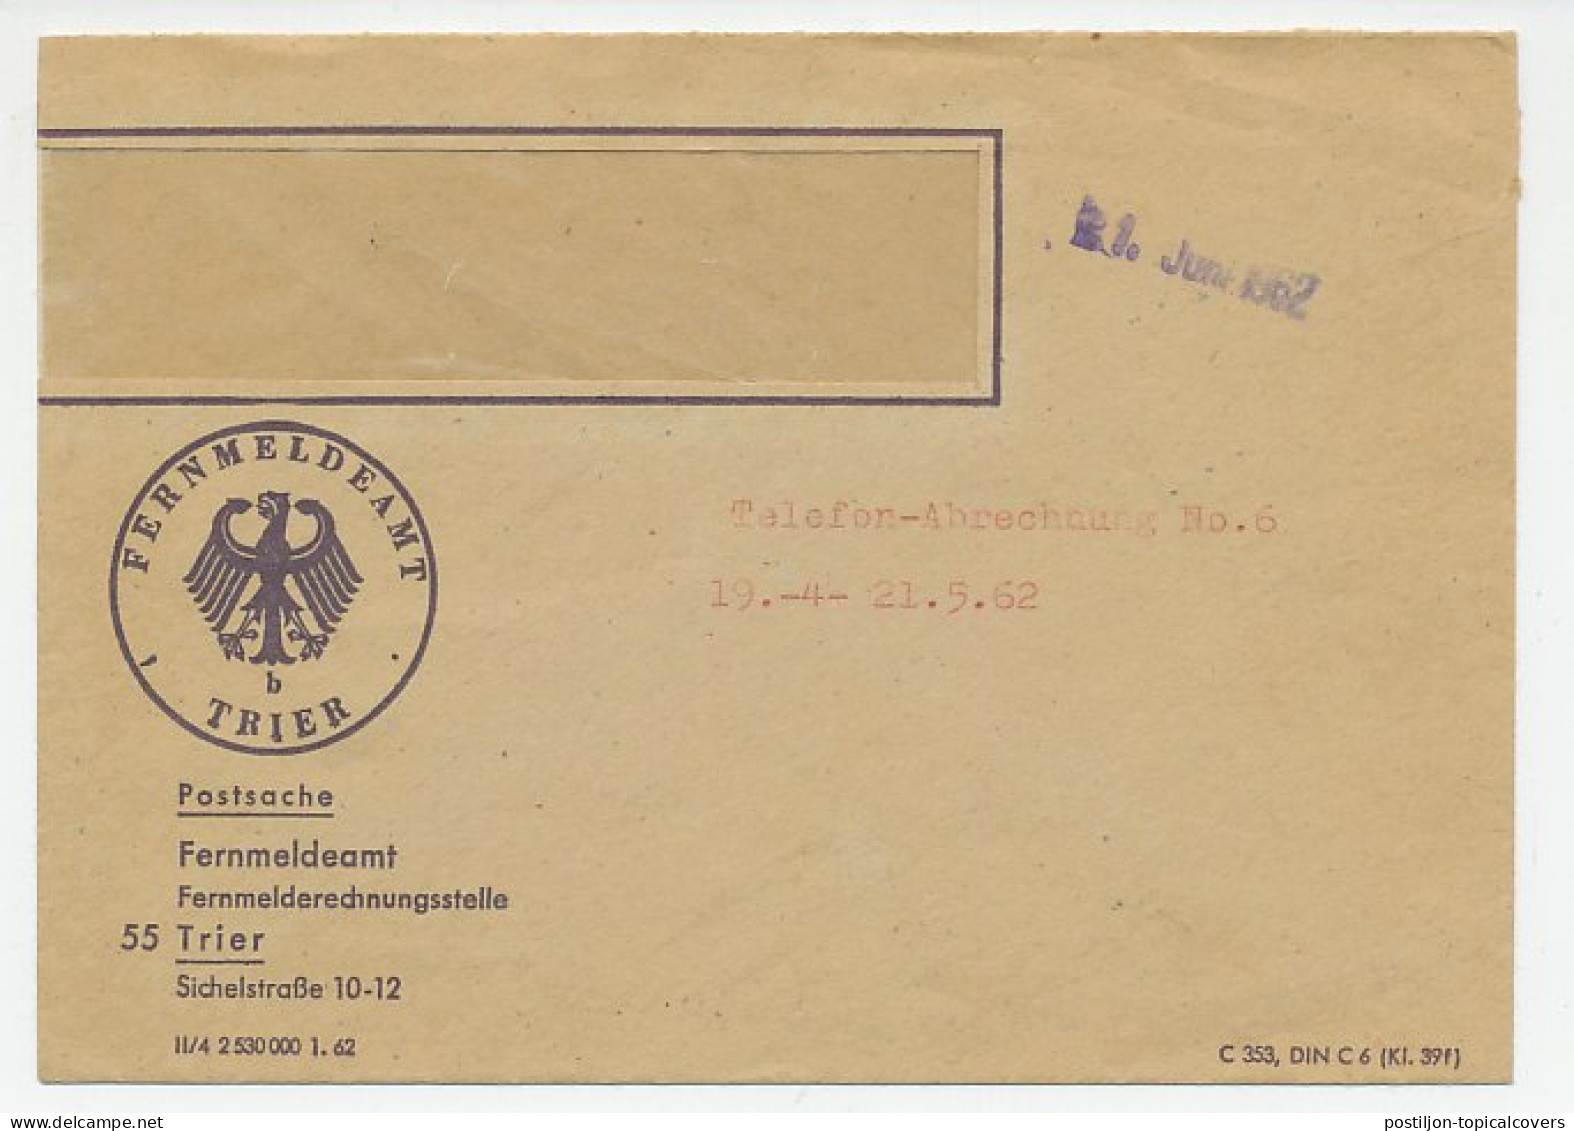 Postal Cheque Cover Germany1962 Garage - Vehicle Construction - Brake Service - Automobili